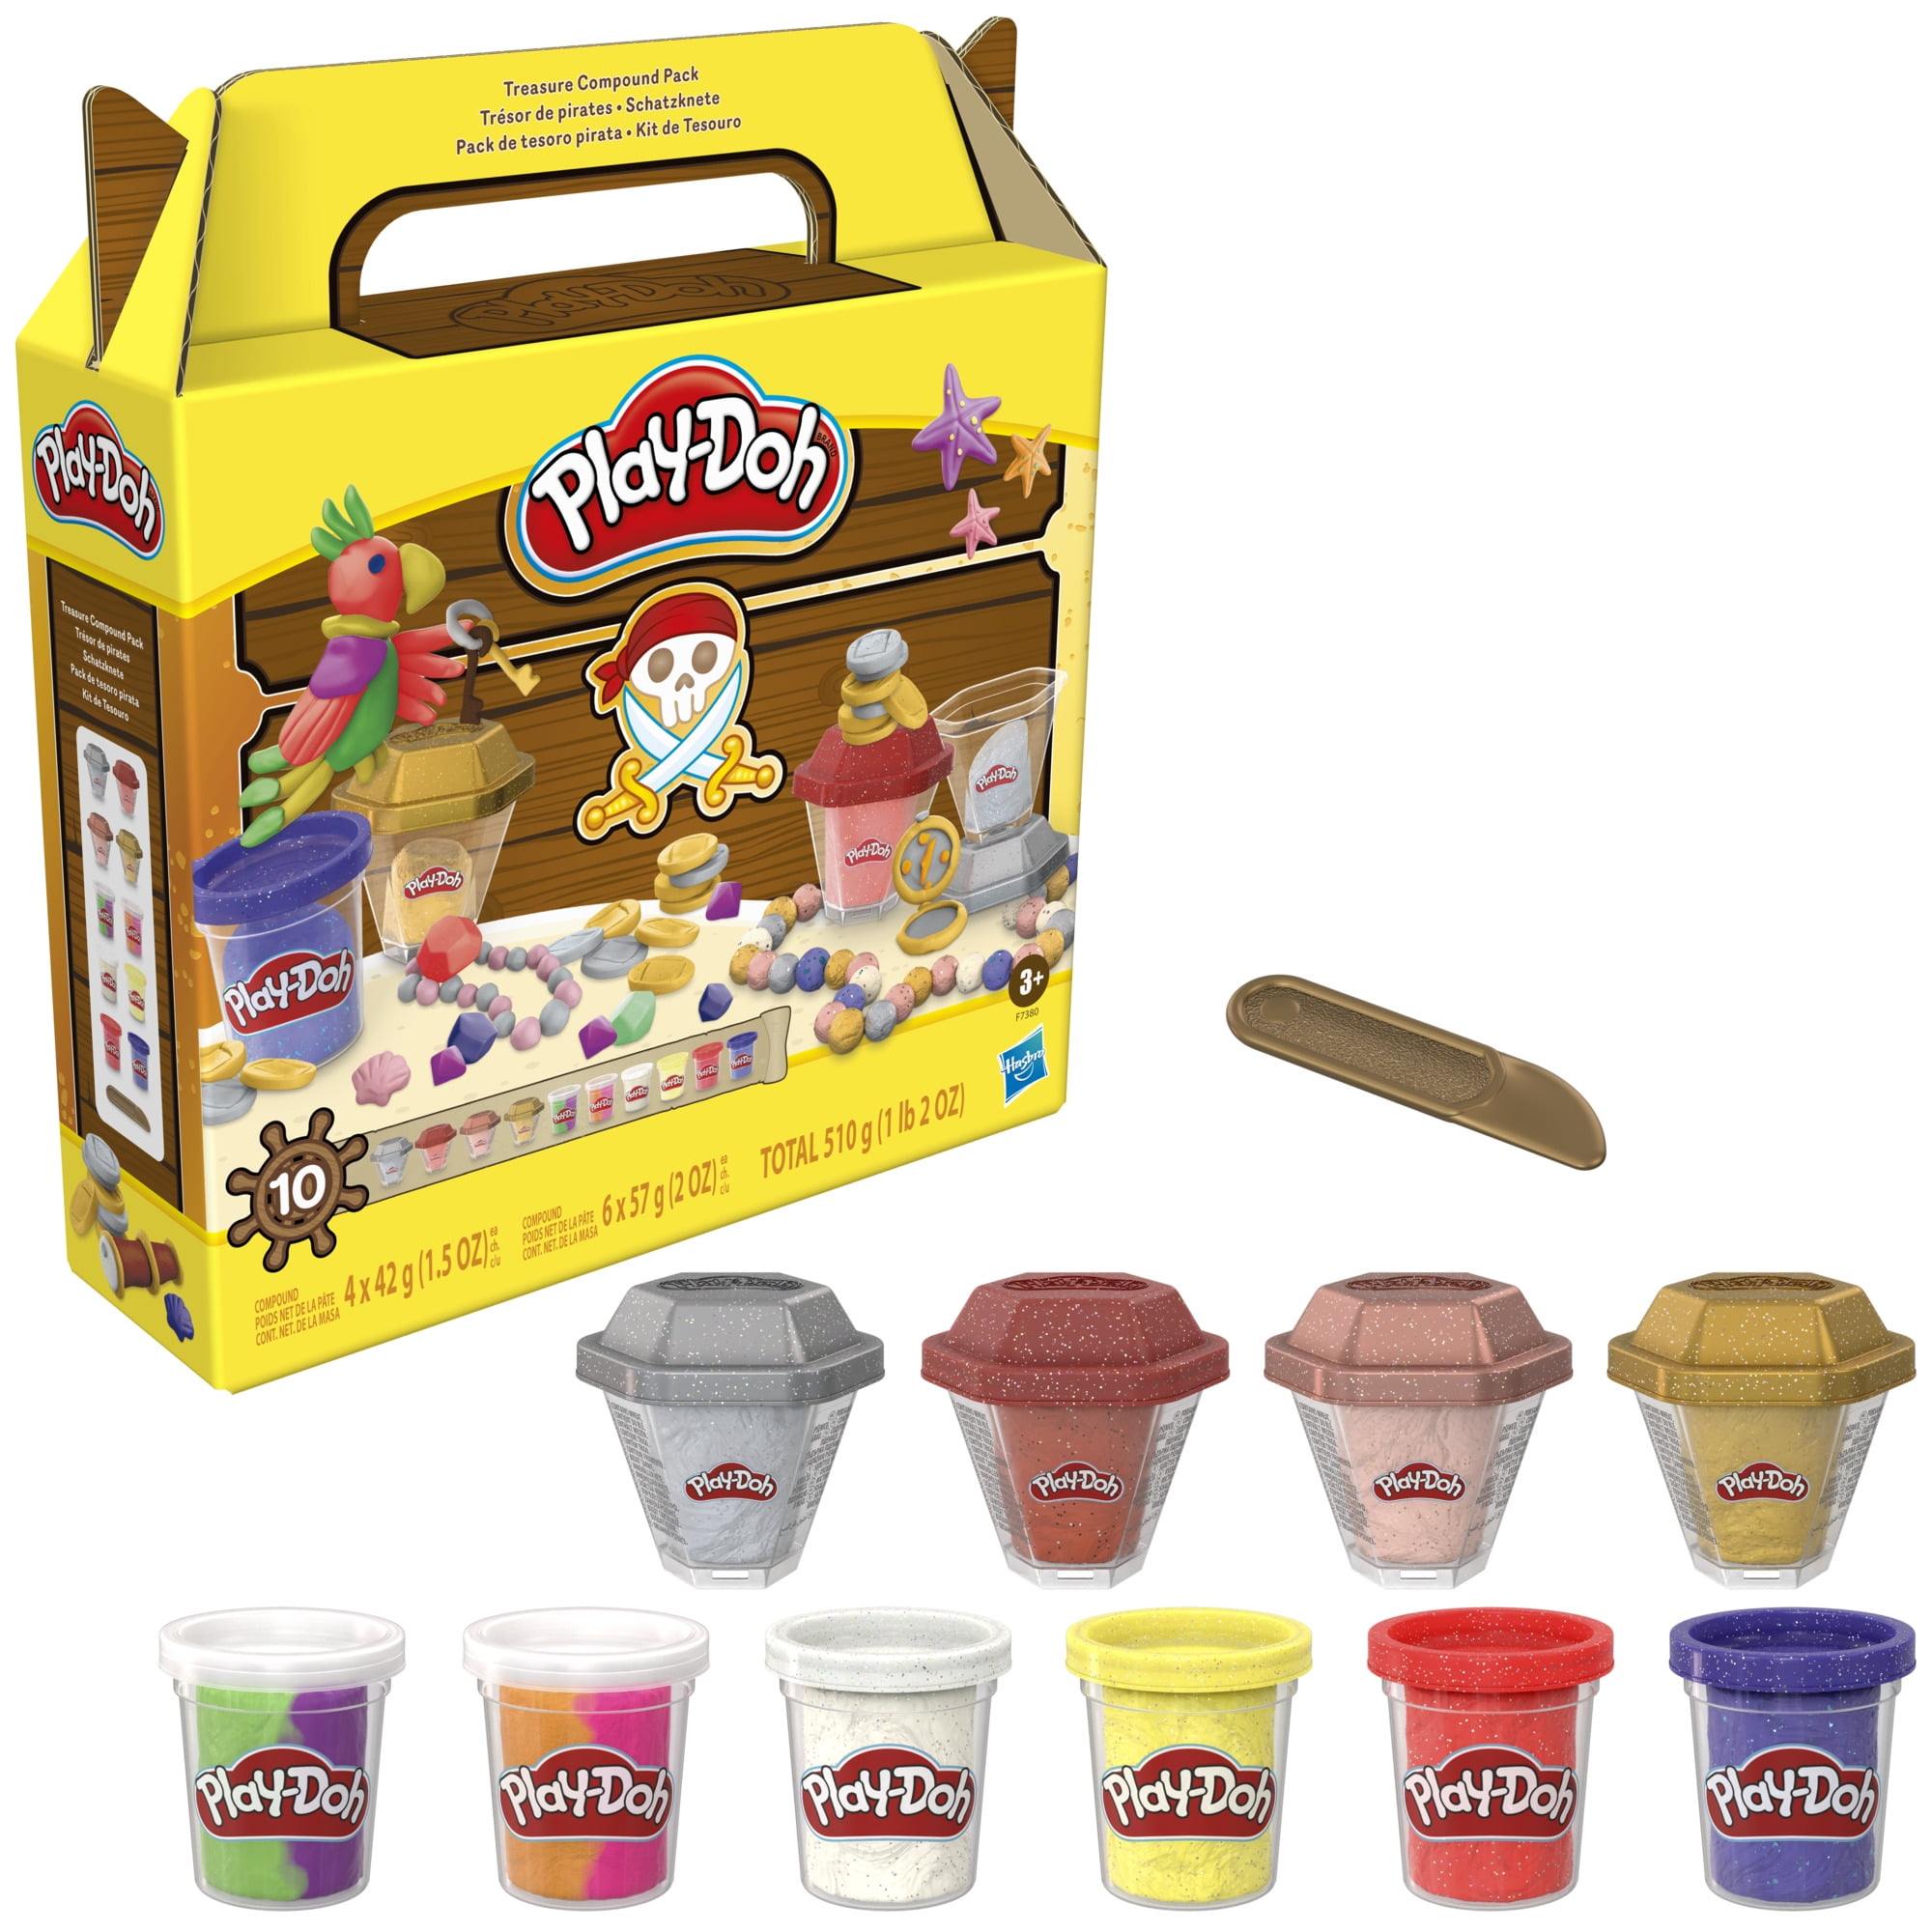 Play-Doh Pirate Theme 13-Pack of Non-Toxic Modeling Algeria